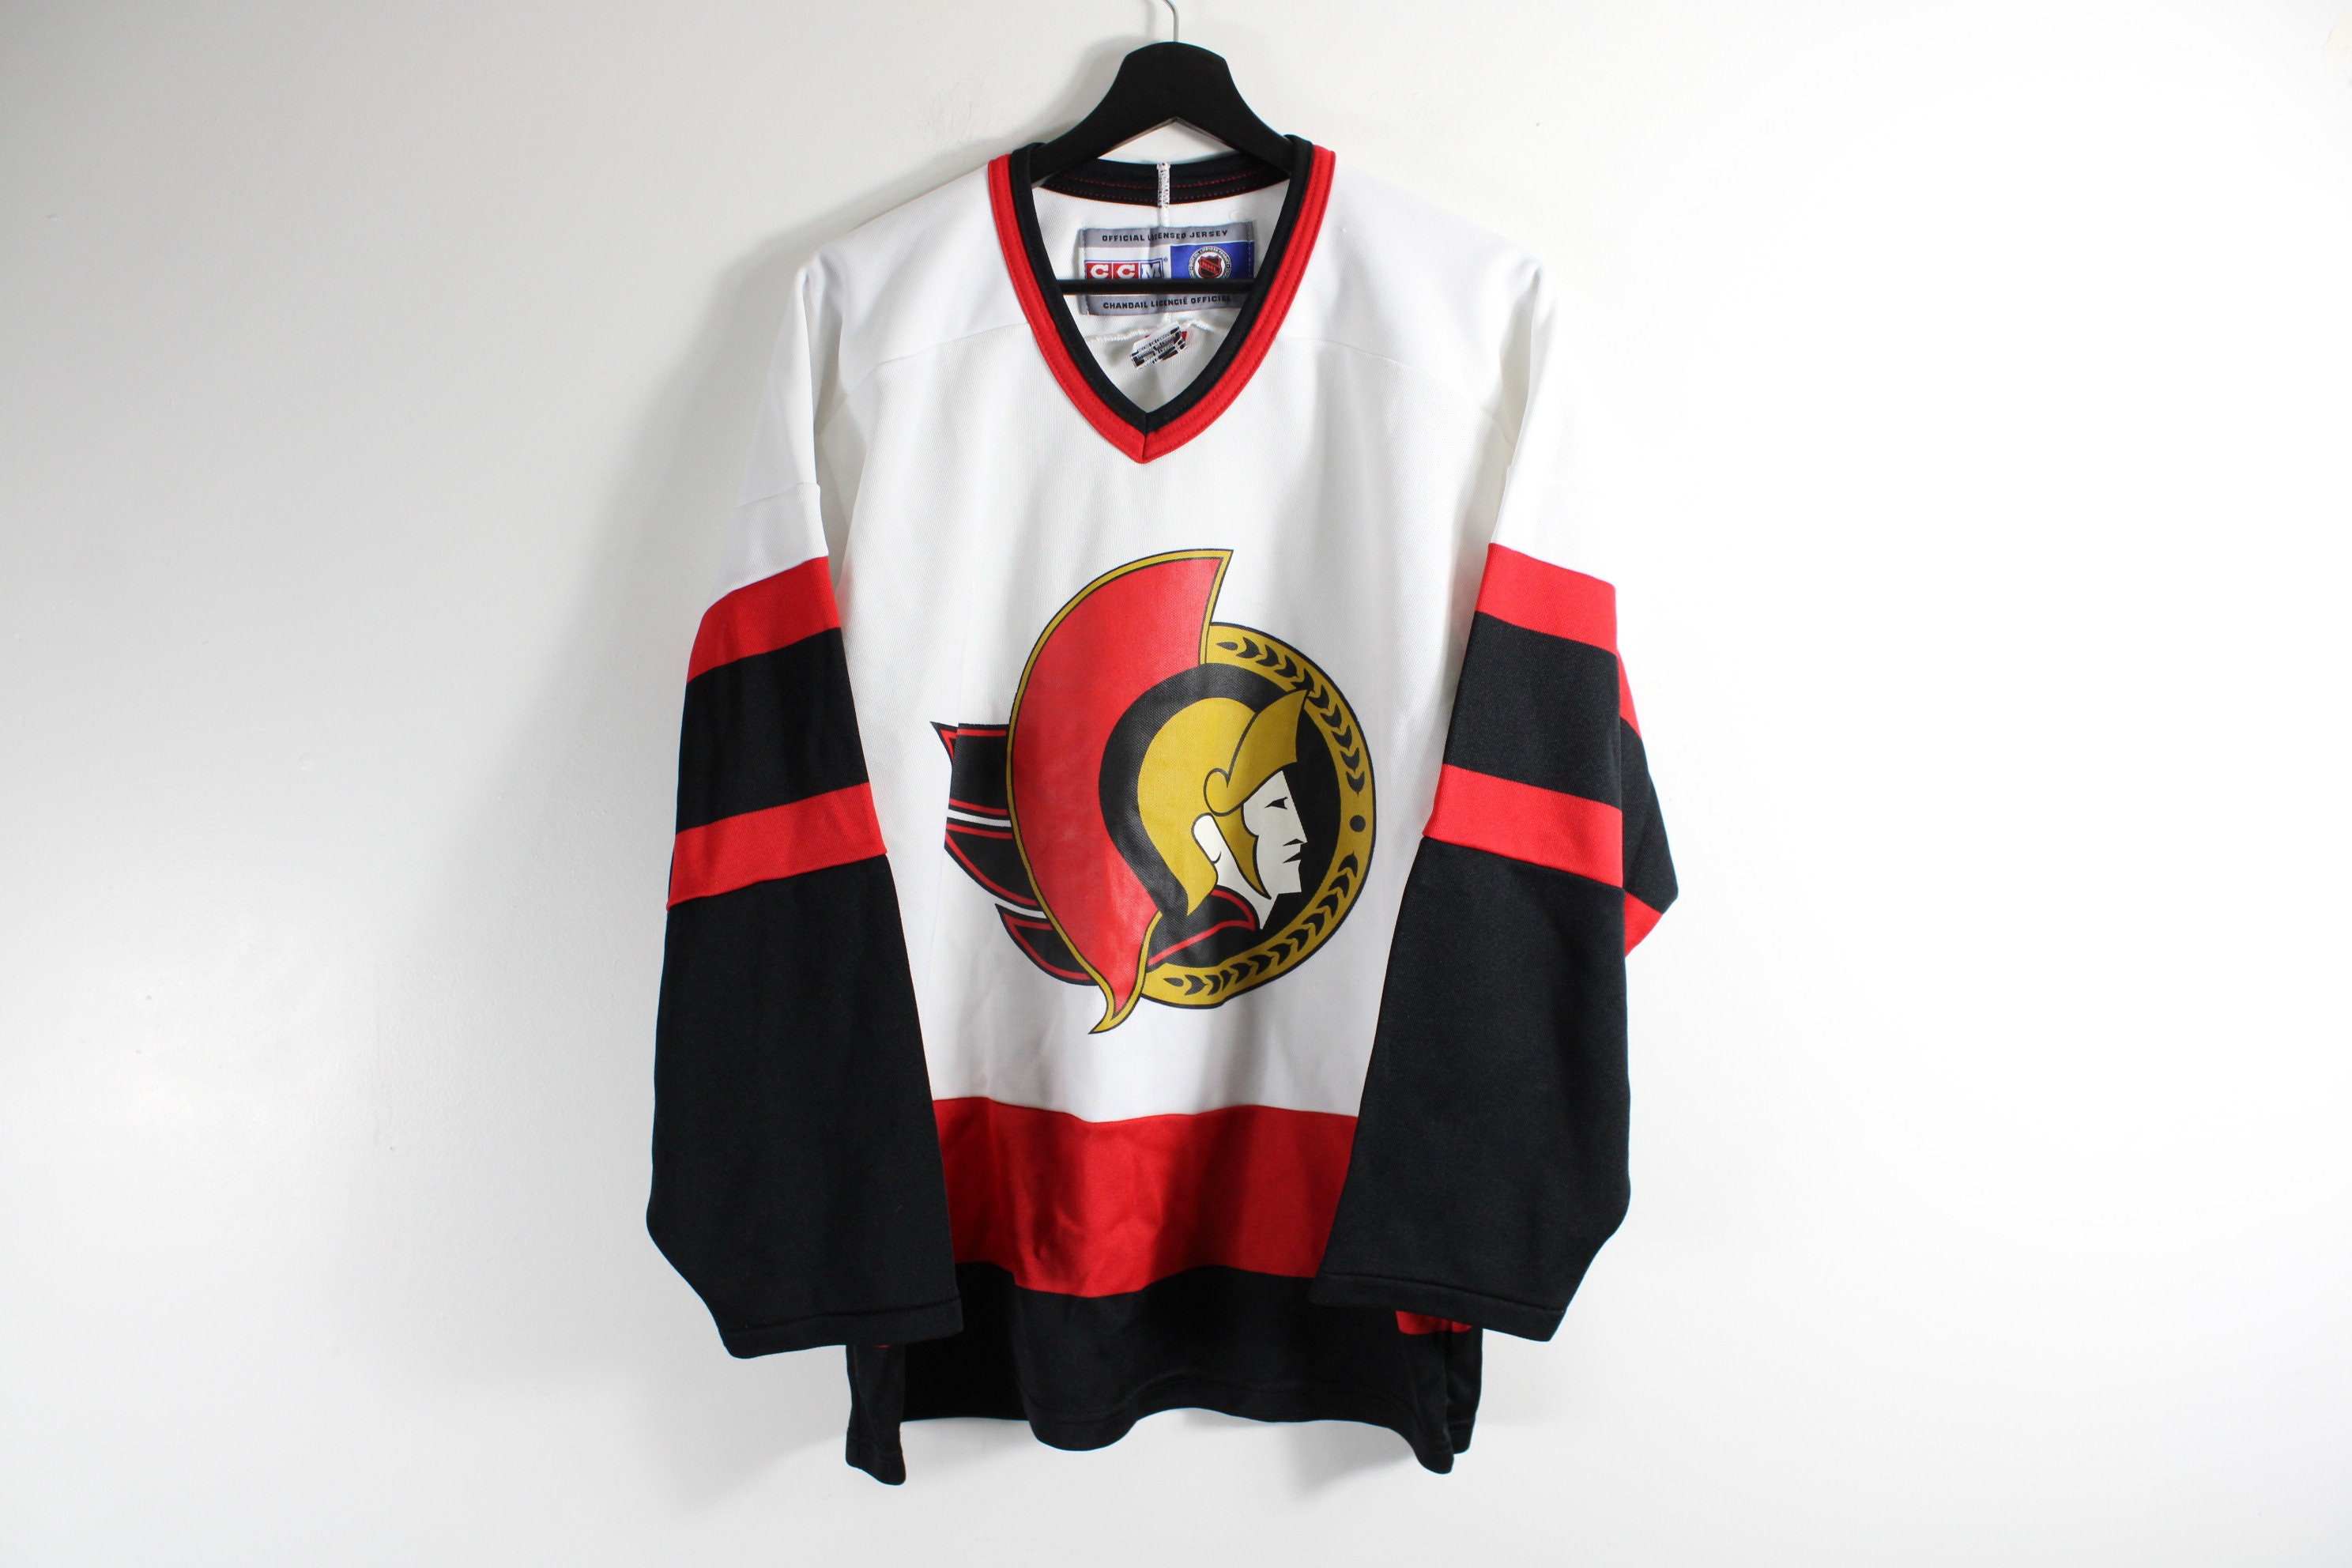 Re: Please Add ADIDAS Variant of Certain CCM NHL Jerseys in